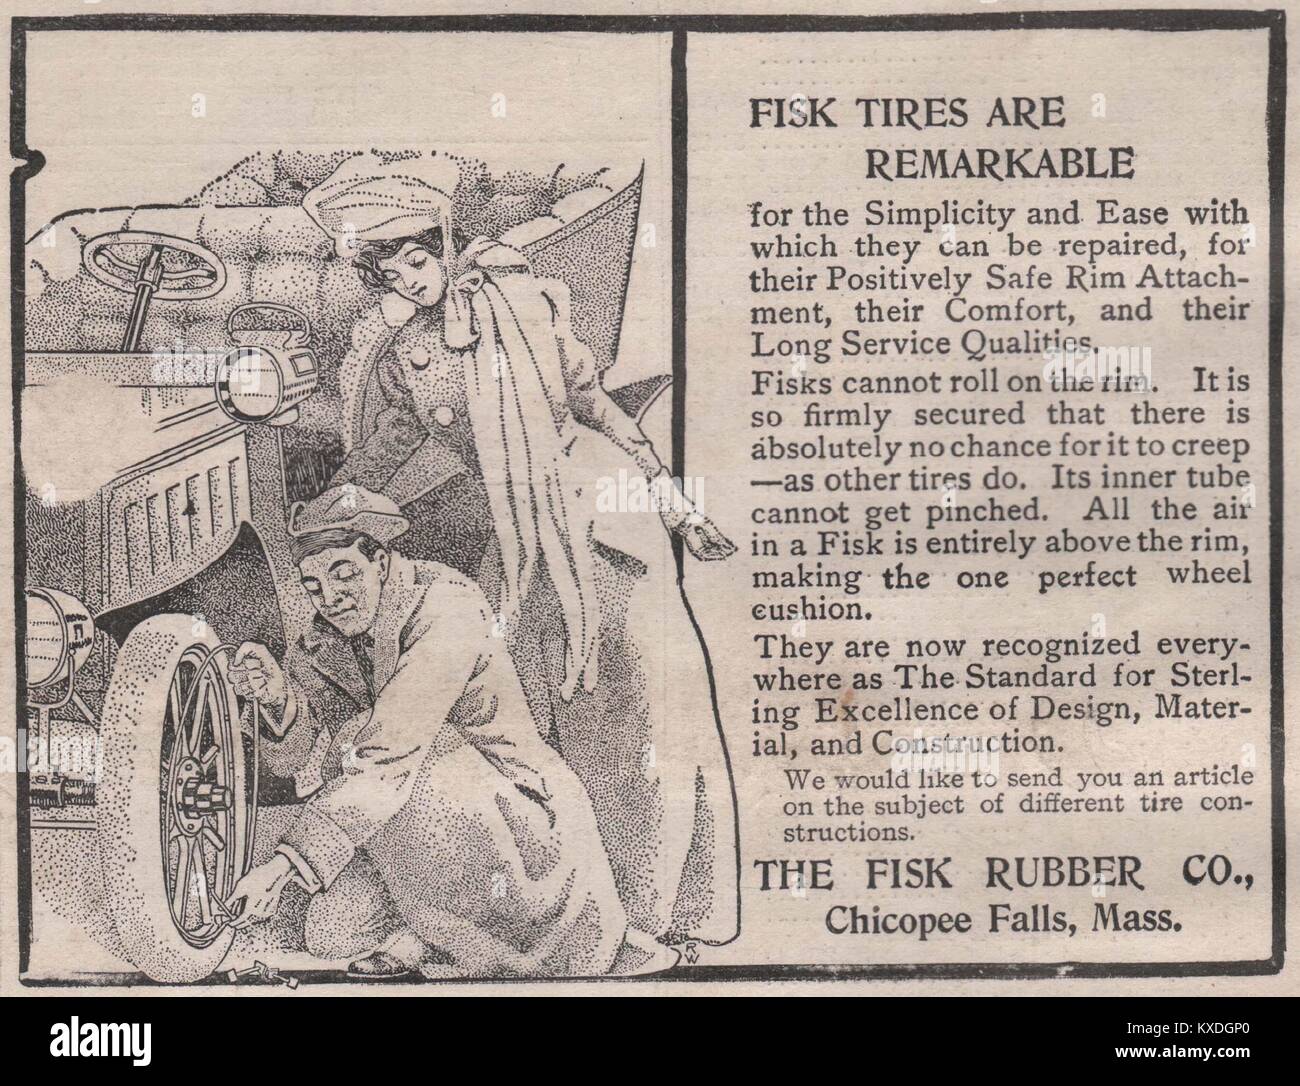 'Fisk Tires are Remarkable' -The Fisk Rubber Co., Chicopee Falls, Mass Stock Photo